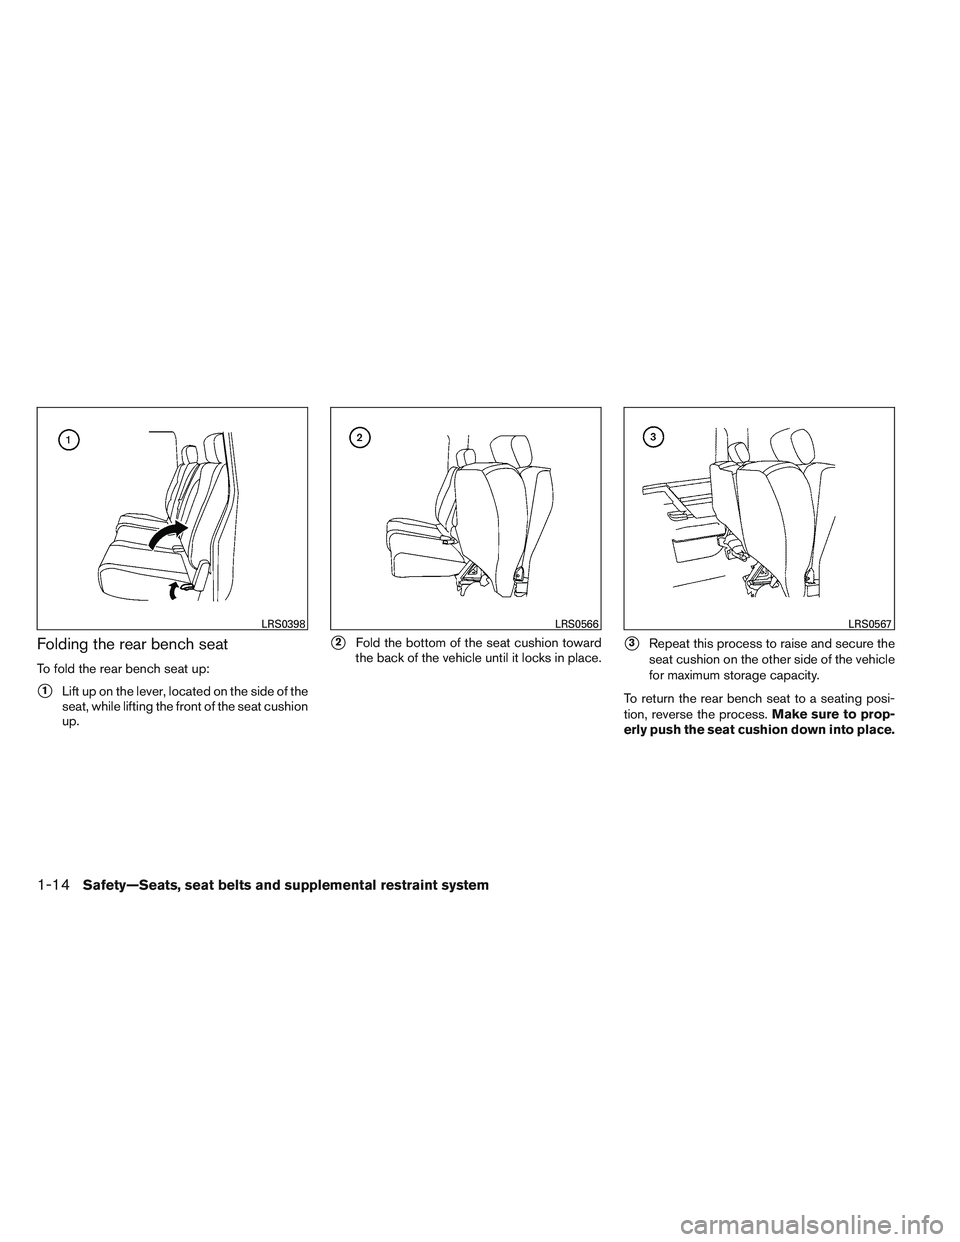 NISSAN FRONTIER 2012  Owner´s Manual Folding the rear bench seat
To fold the rear bench seat up:
1Lift up on the lever, located on the side of the
seat, while lifting the front of the seat cushion
up.
2Fold the bottom of the seat cushi